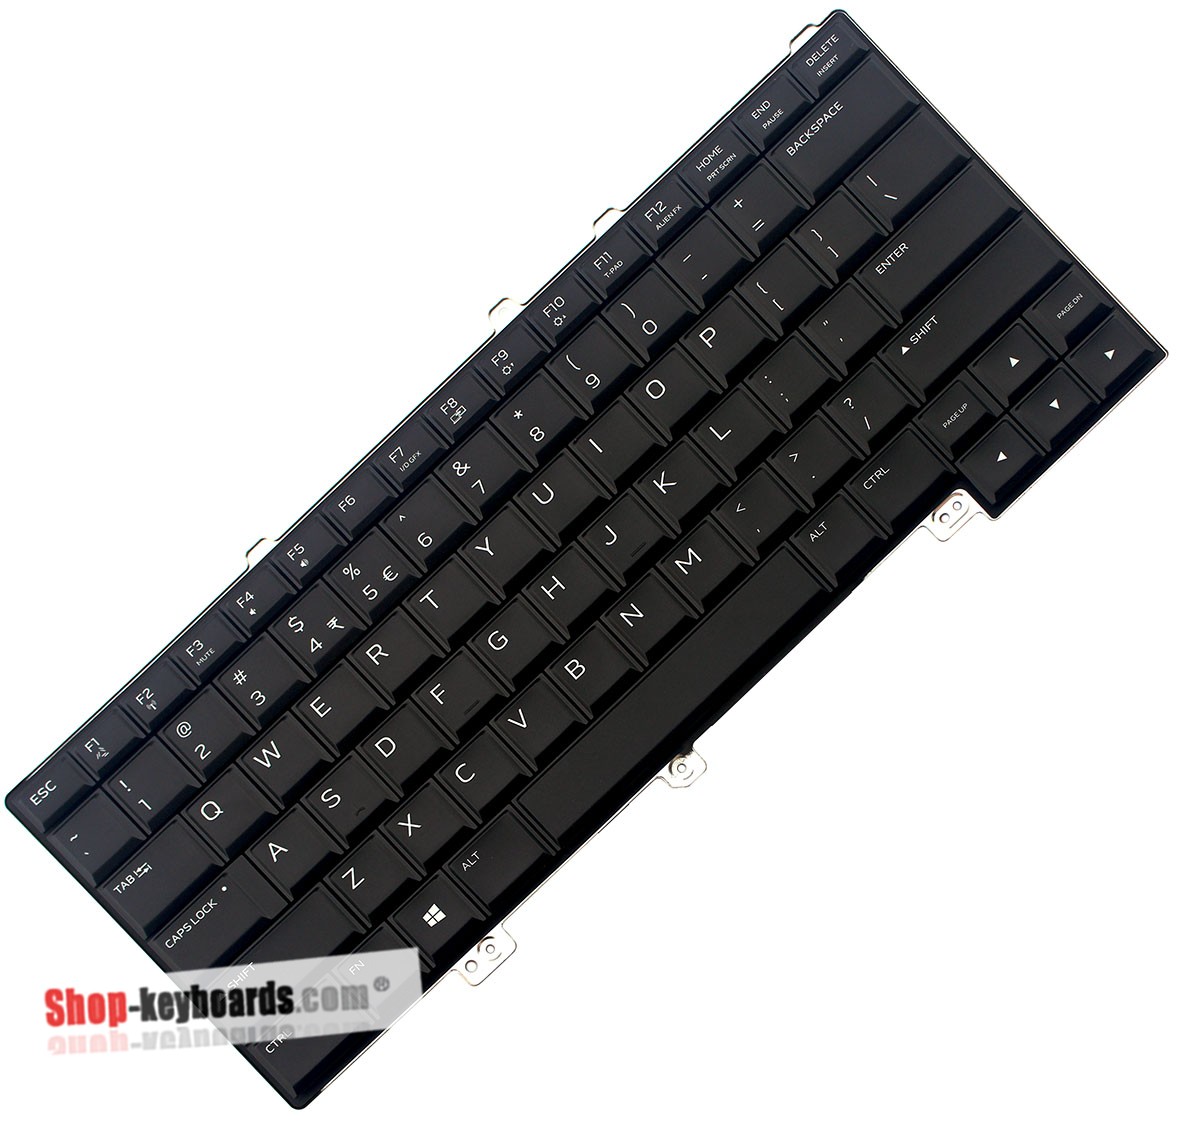 Dell ALIENWARE 15 R3 MAX-Q Keyboard replacement